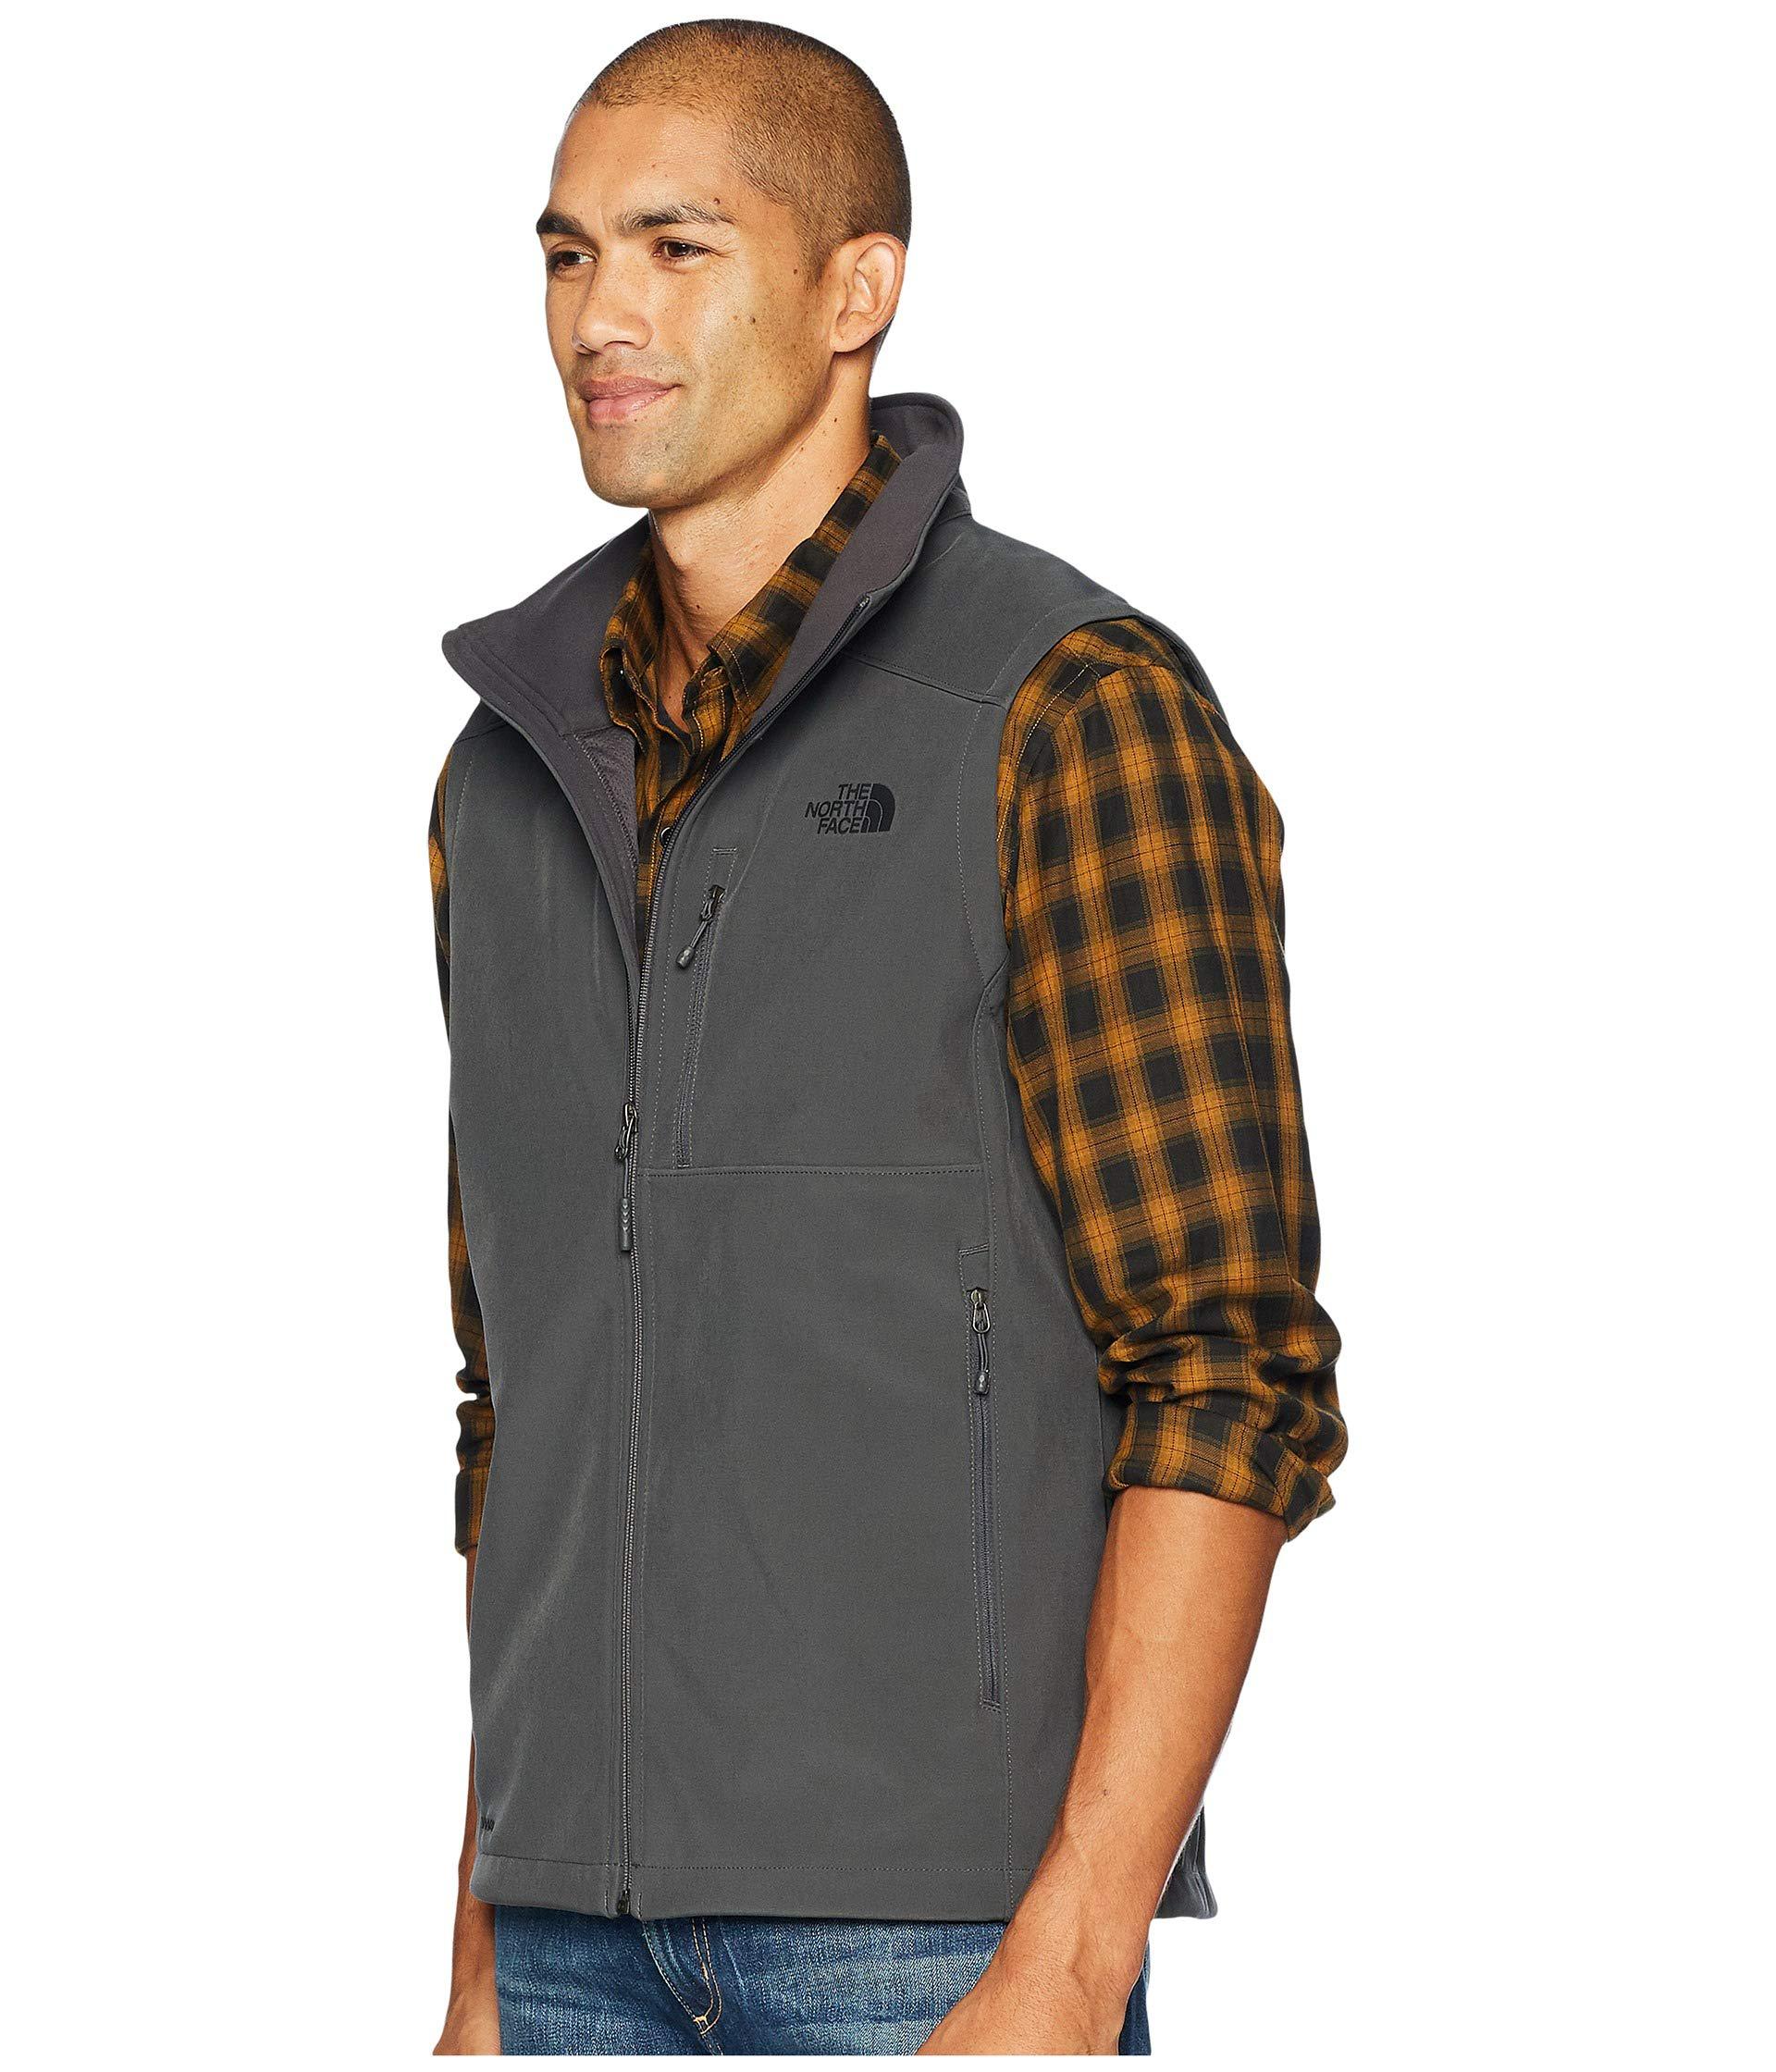 North Face Bionic 2 Vest Hotsell, 56% OFF | www.slyderstavern.com